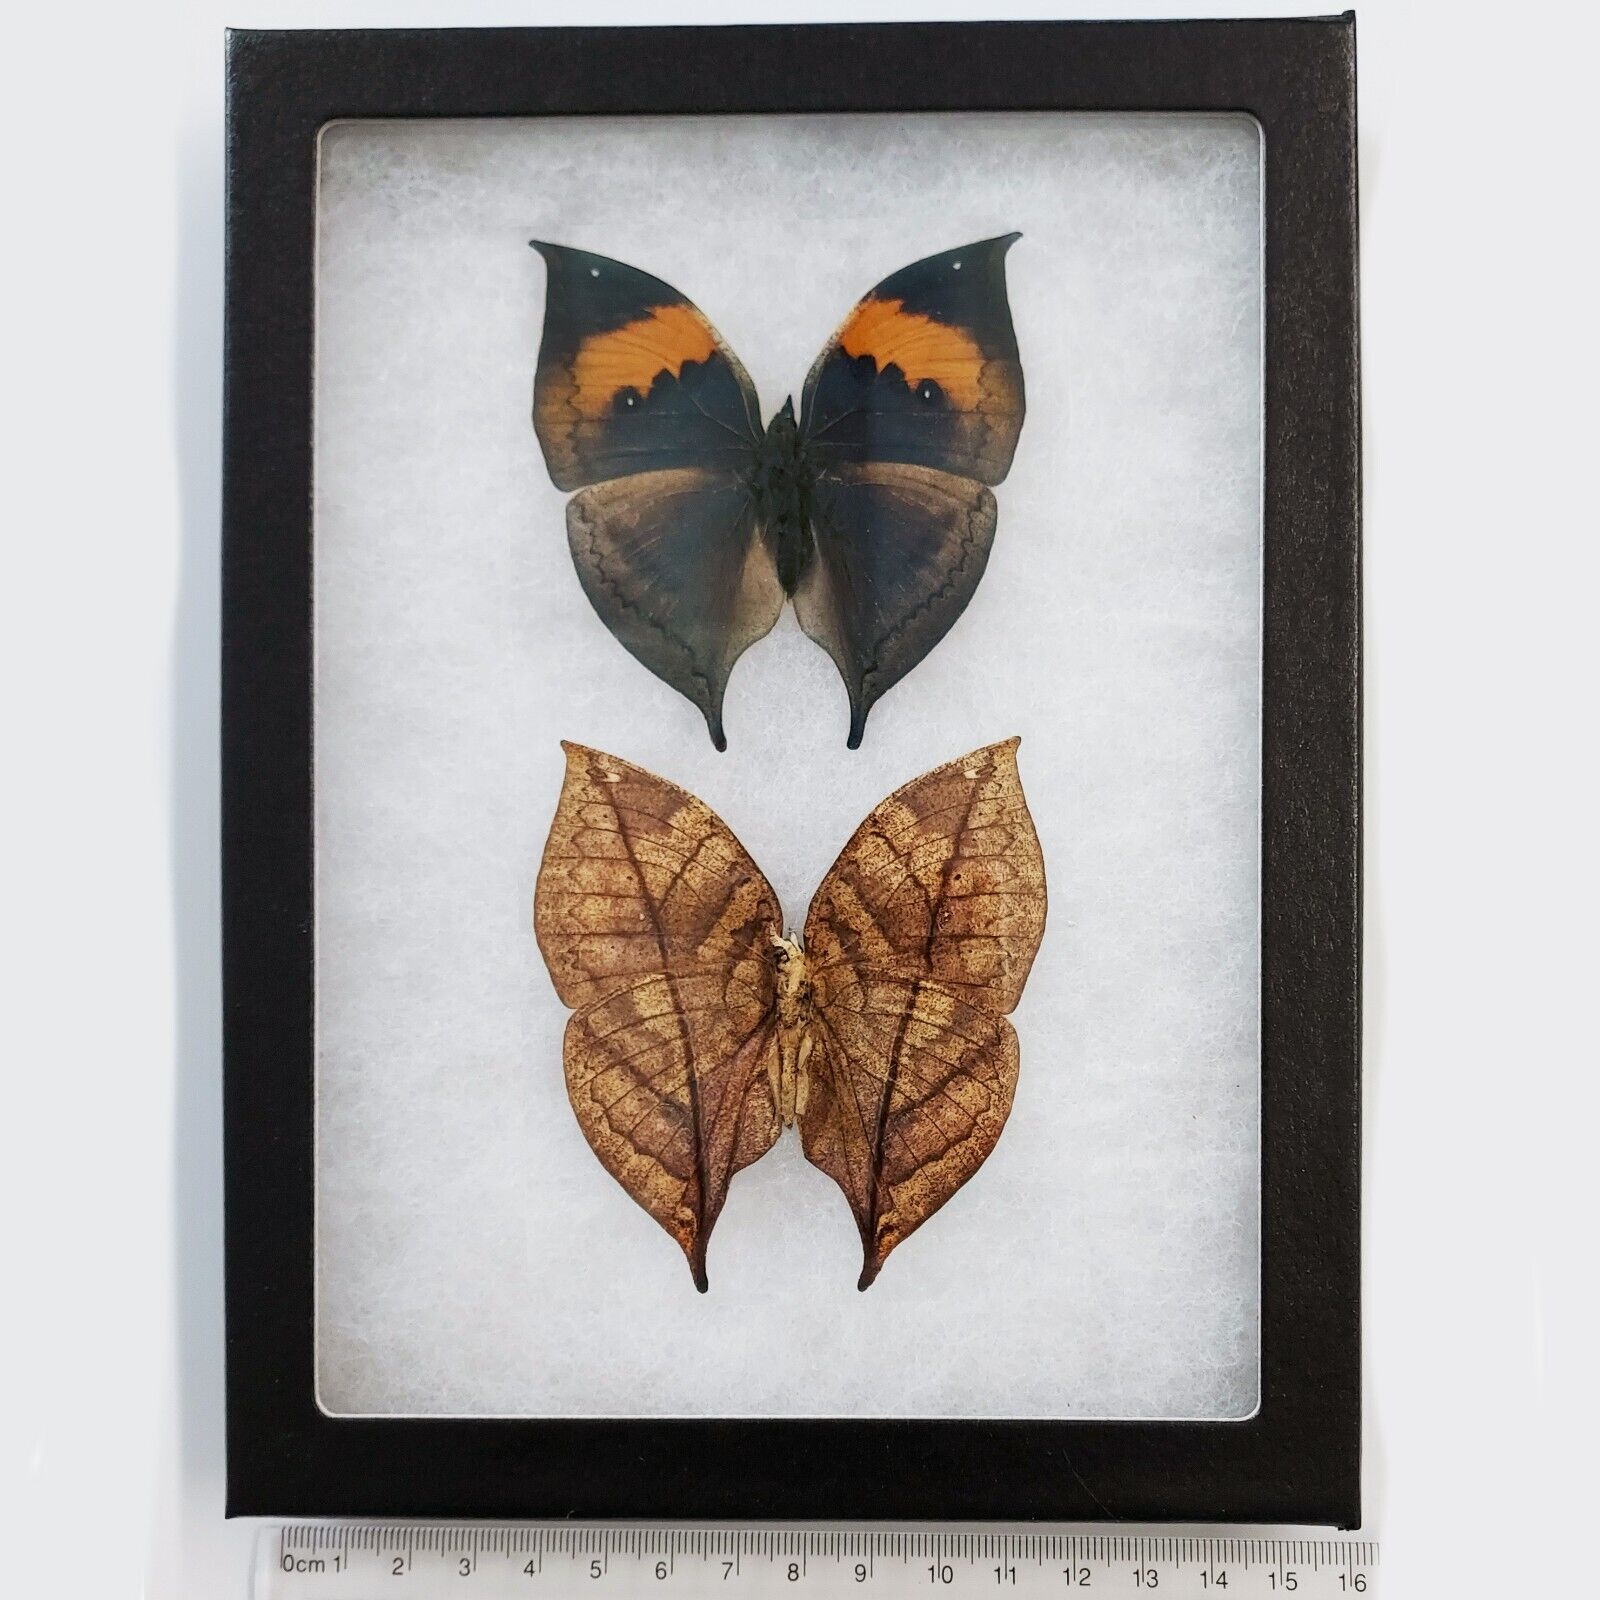 Kallima inachis VERSO + RECTO leaf mimic butterfly China FRAMED PAIR